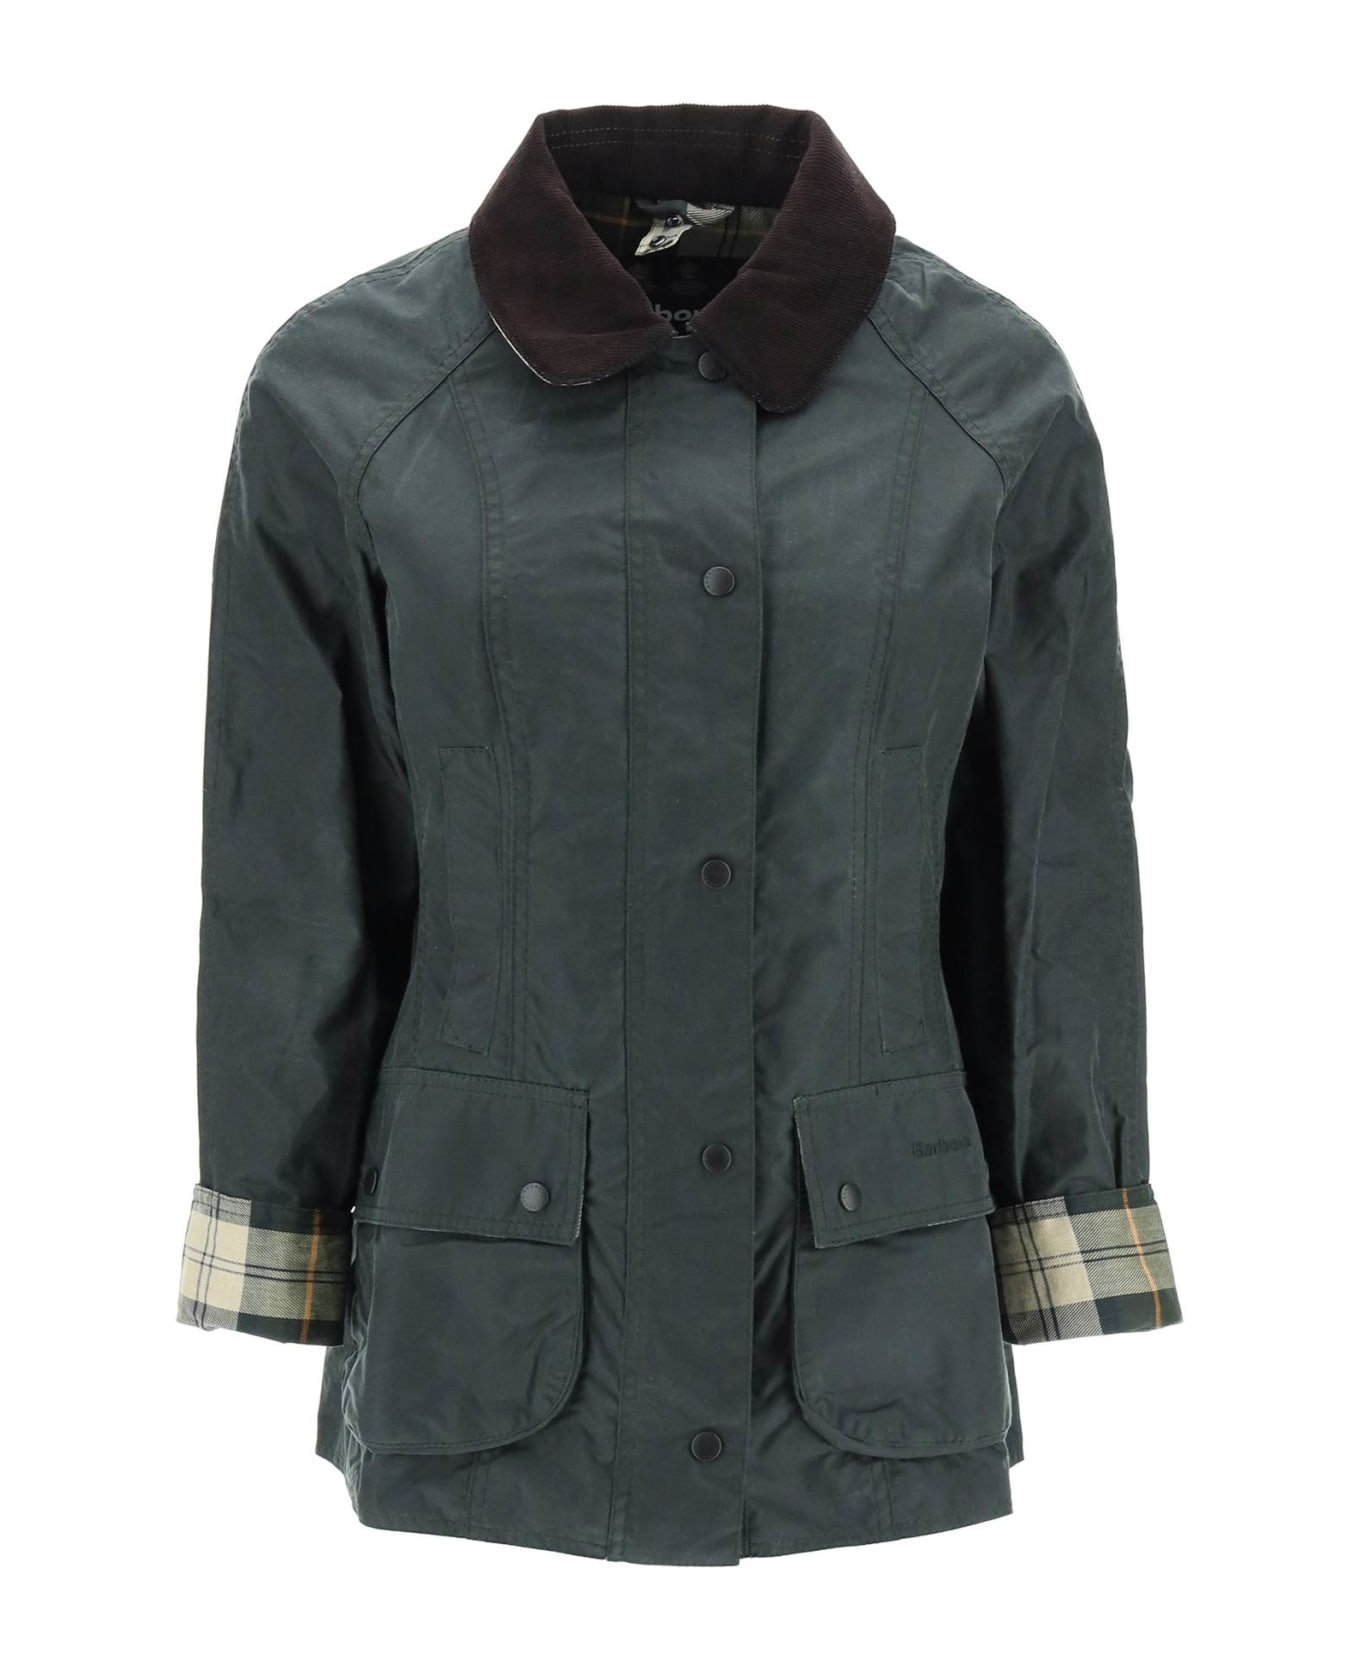 Barbour Beandell Waxed Cotton Jacket - green